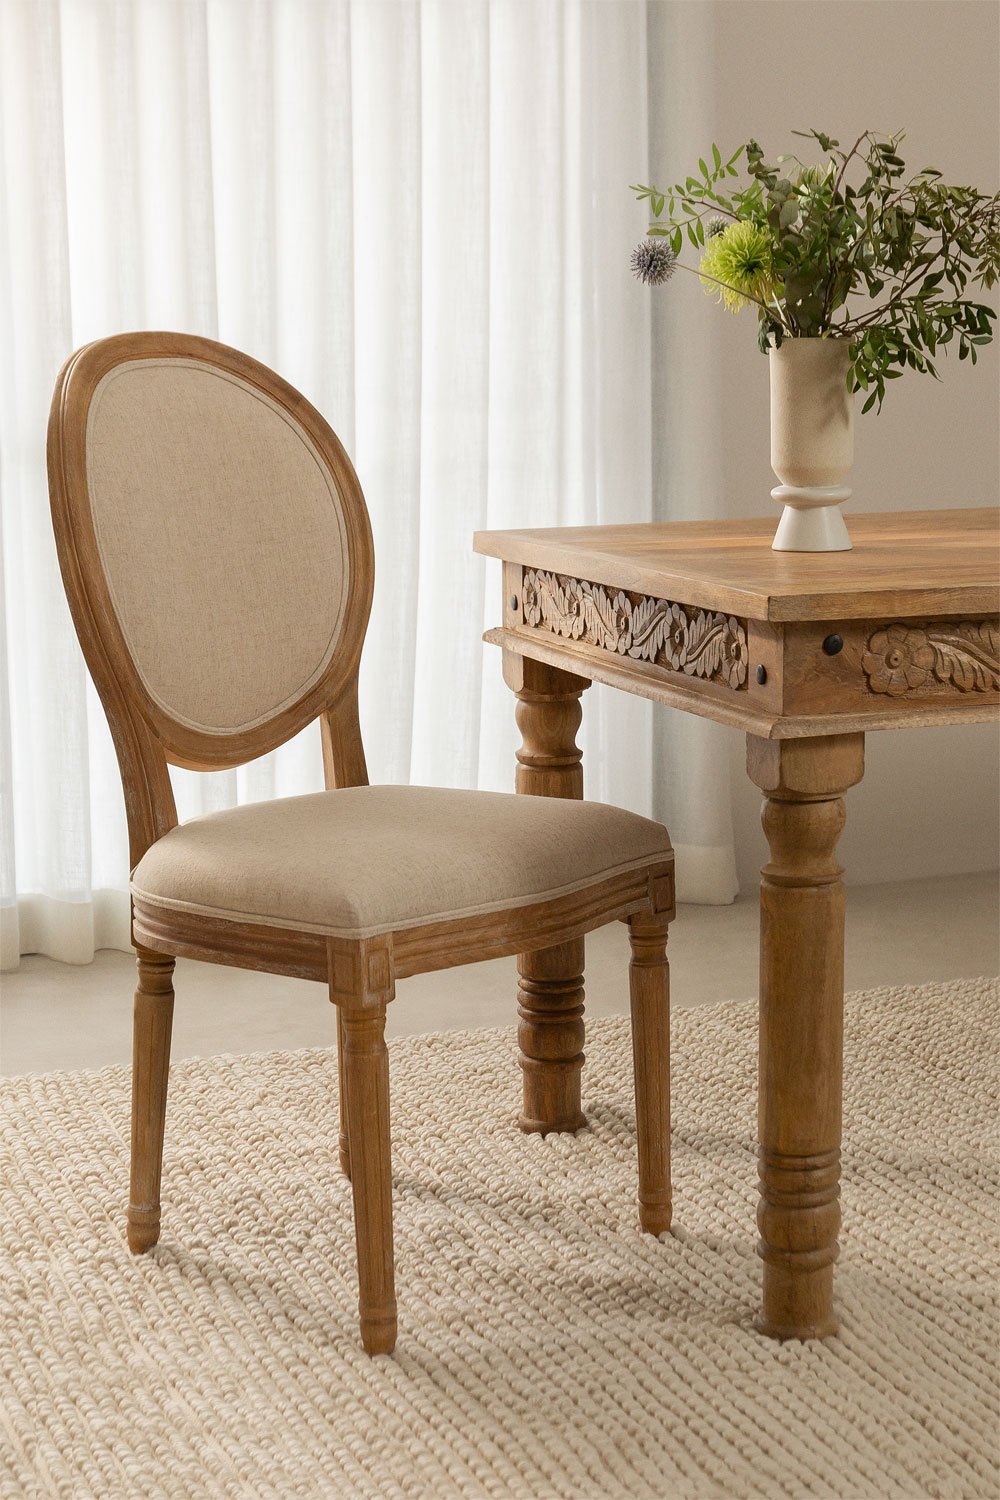 Sunna upholstered dining chair, gallery image 1